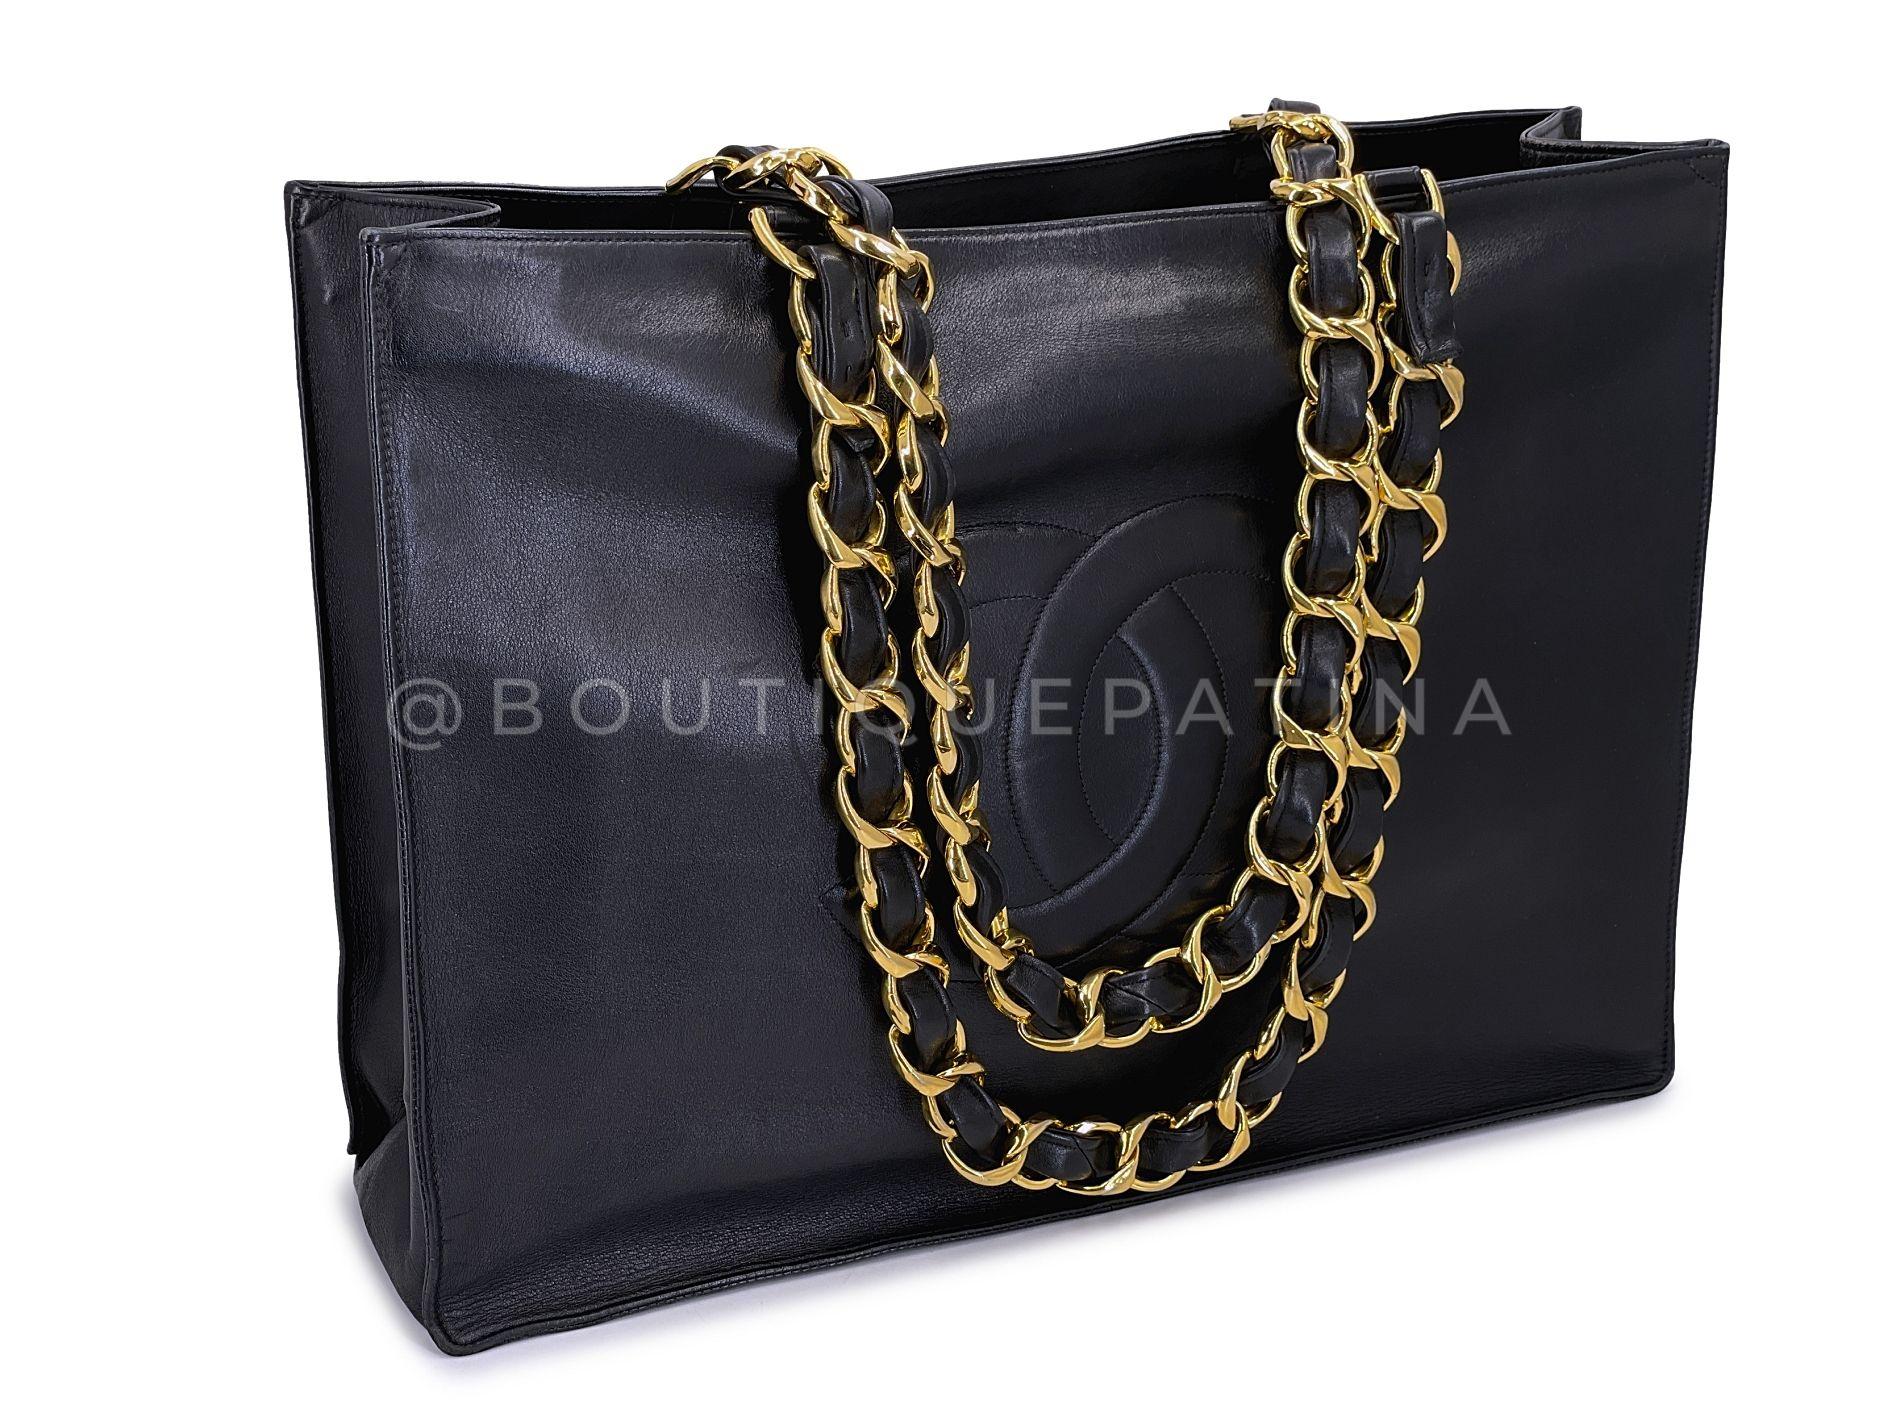 Store item: 64872
Exquisitely and fantastically a Chanel classic, this gorgeous tote must not be missed
A classic vintage piece, this bag features a classic Chanel smooth calfskin exterior with a large signature 